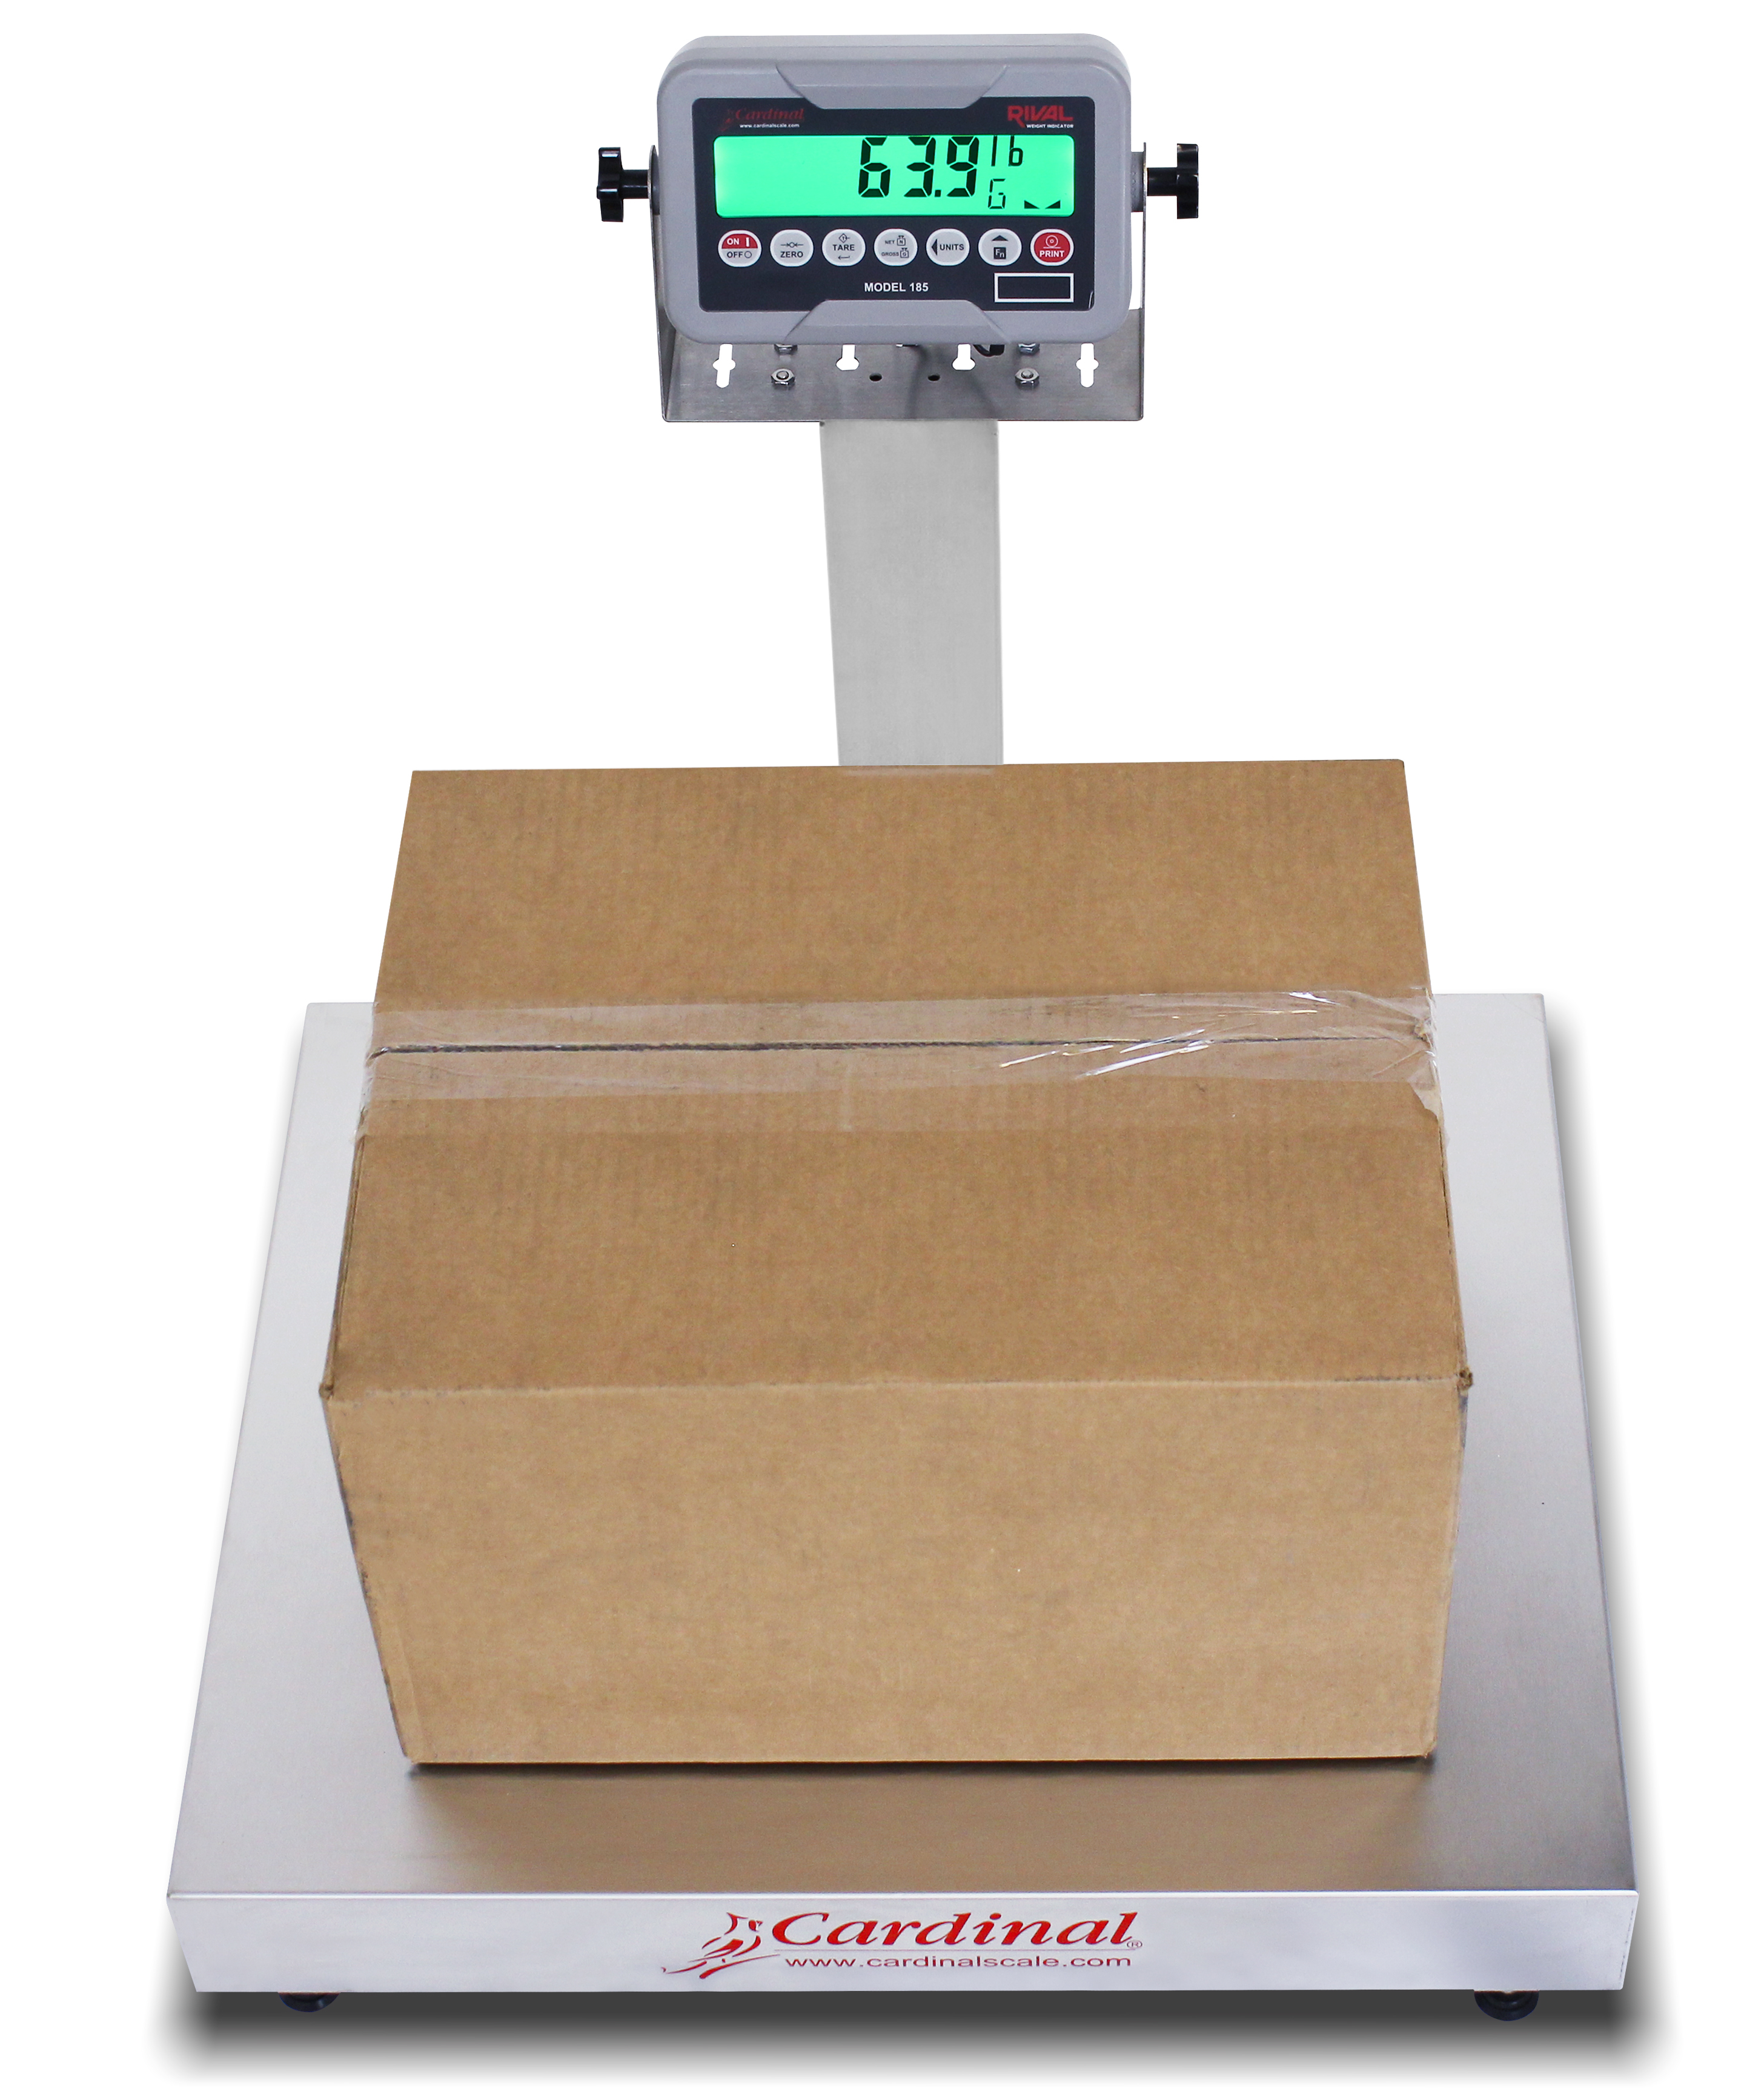 Cardinal Scales 5852F-185B Portable Scale, Electronic, 500 Lb Capacity,  185B Indicator - Scale Warehouse and More